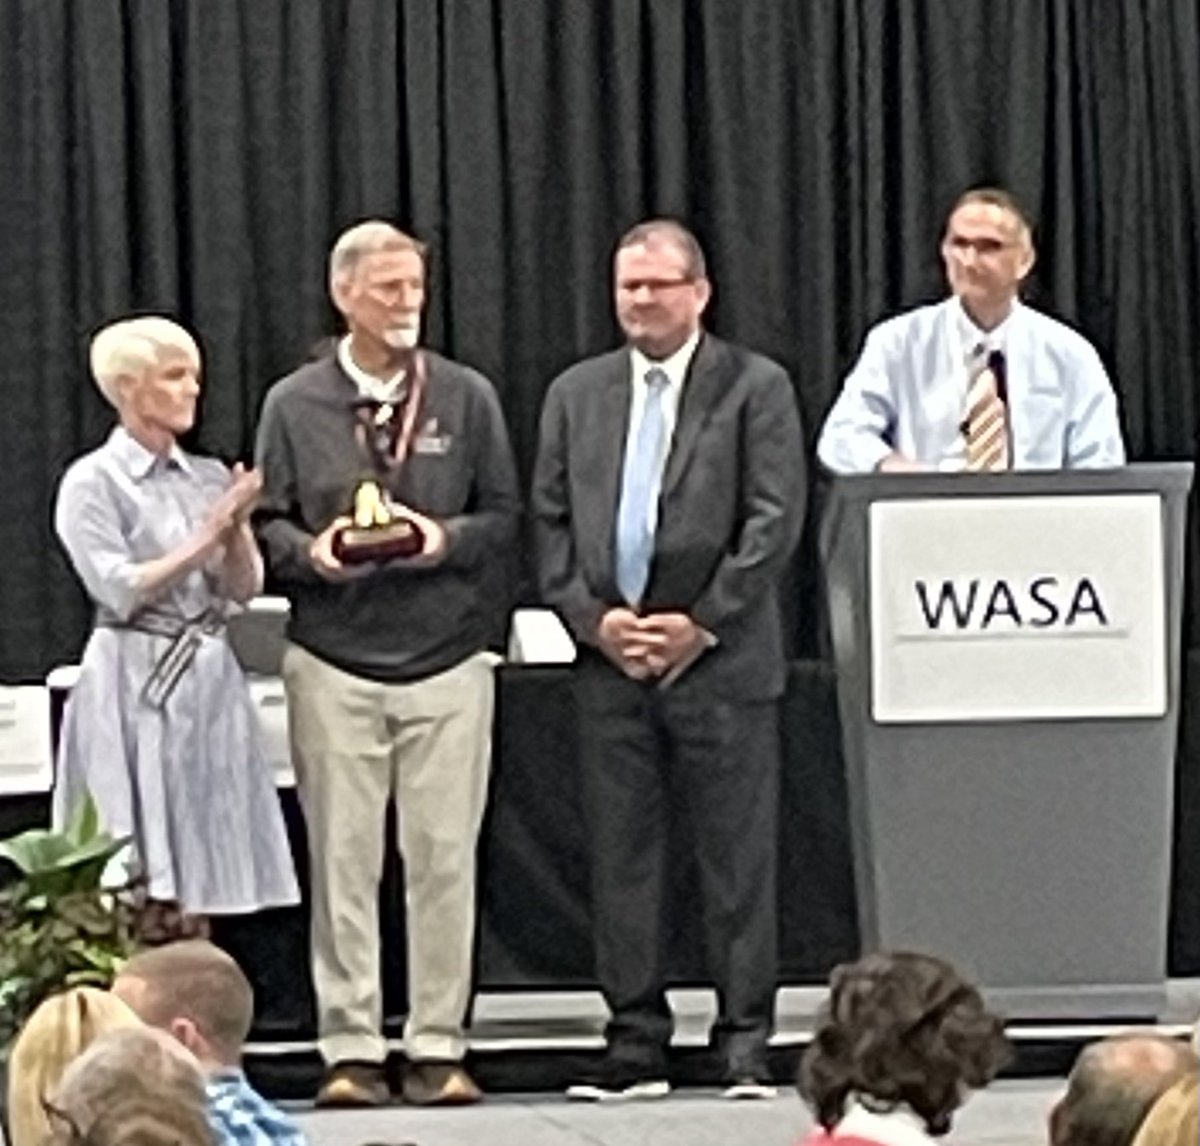 WSU's College of Ed extends our Congratulations to Jim Kowalkowski who has been recognized by WASA as the recipient of their 2023 Service to WASA award for his exceptional work at the WSU Rural Ed Center and his legislative advocacy for K-12 schools!  Congratulations Jim!!